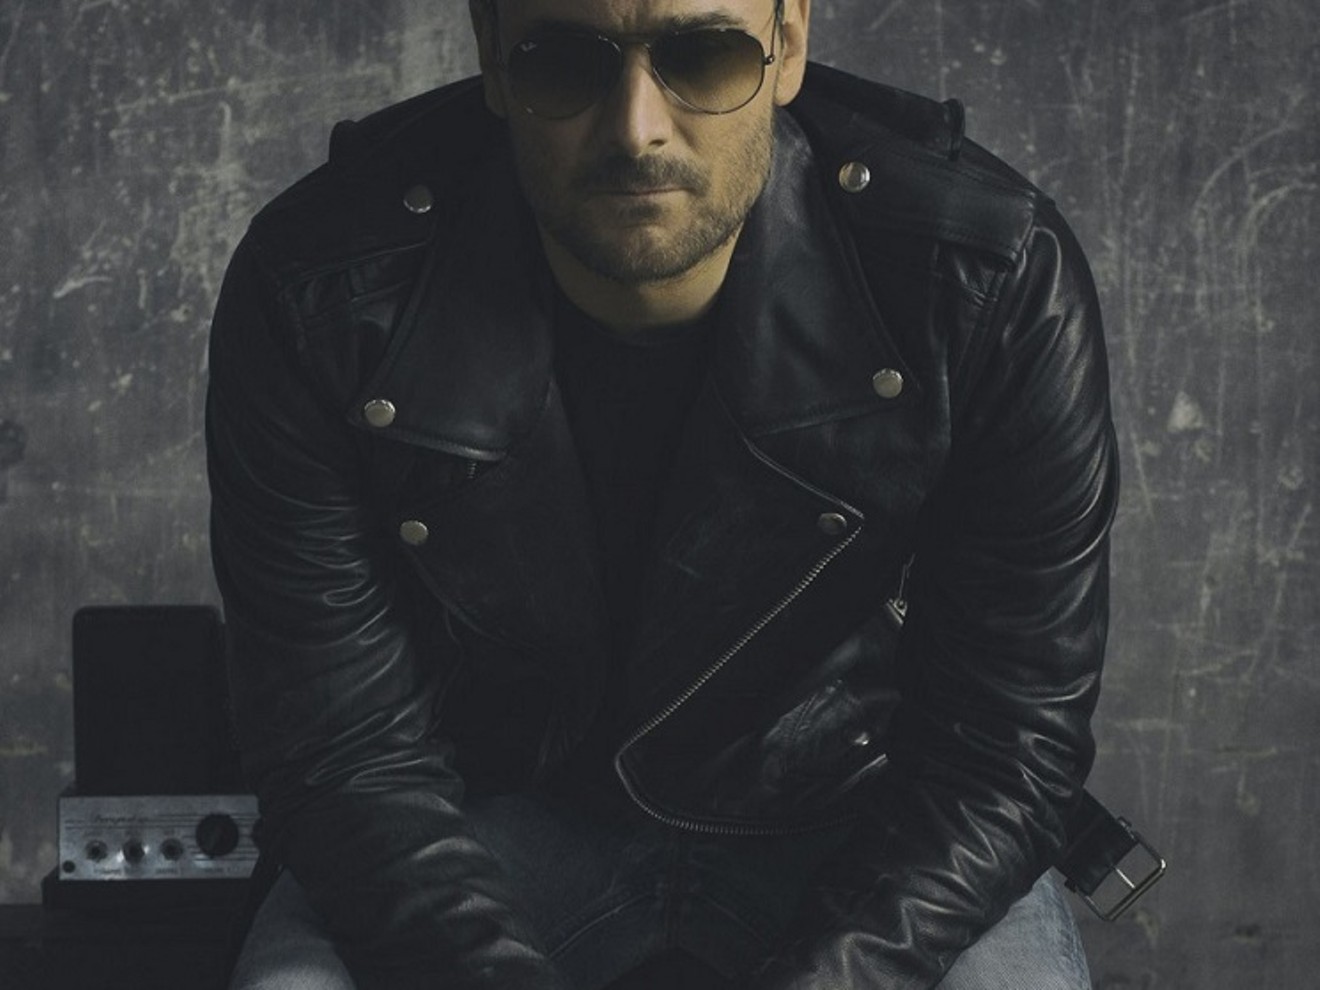 Eric Church plays a rescheduled show at Cynthia Woods Mitchell Pavilion on Friday, April 27.